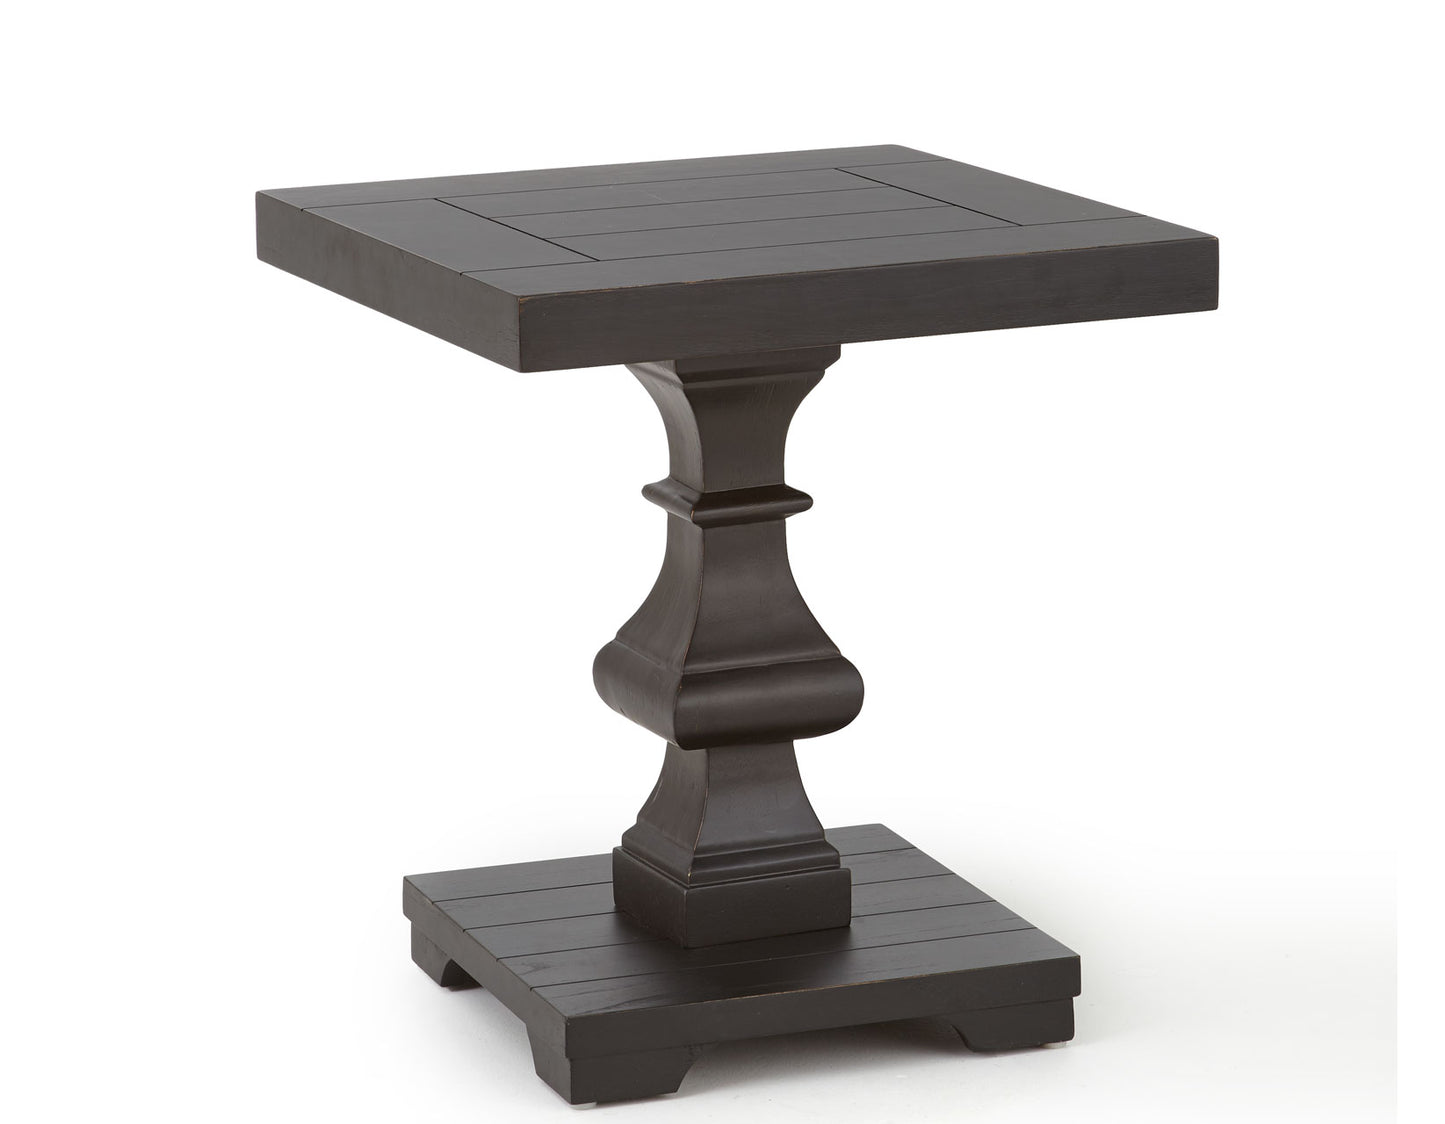 Dory 3-Piece Set
(Cocktail Table & 2 End Tables)